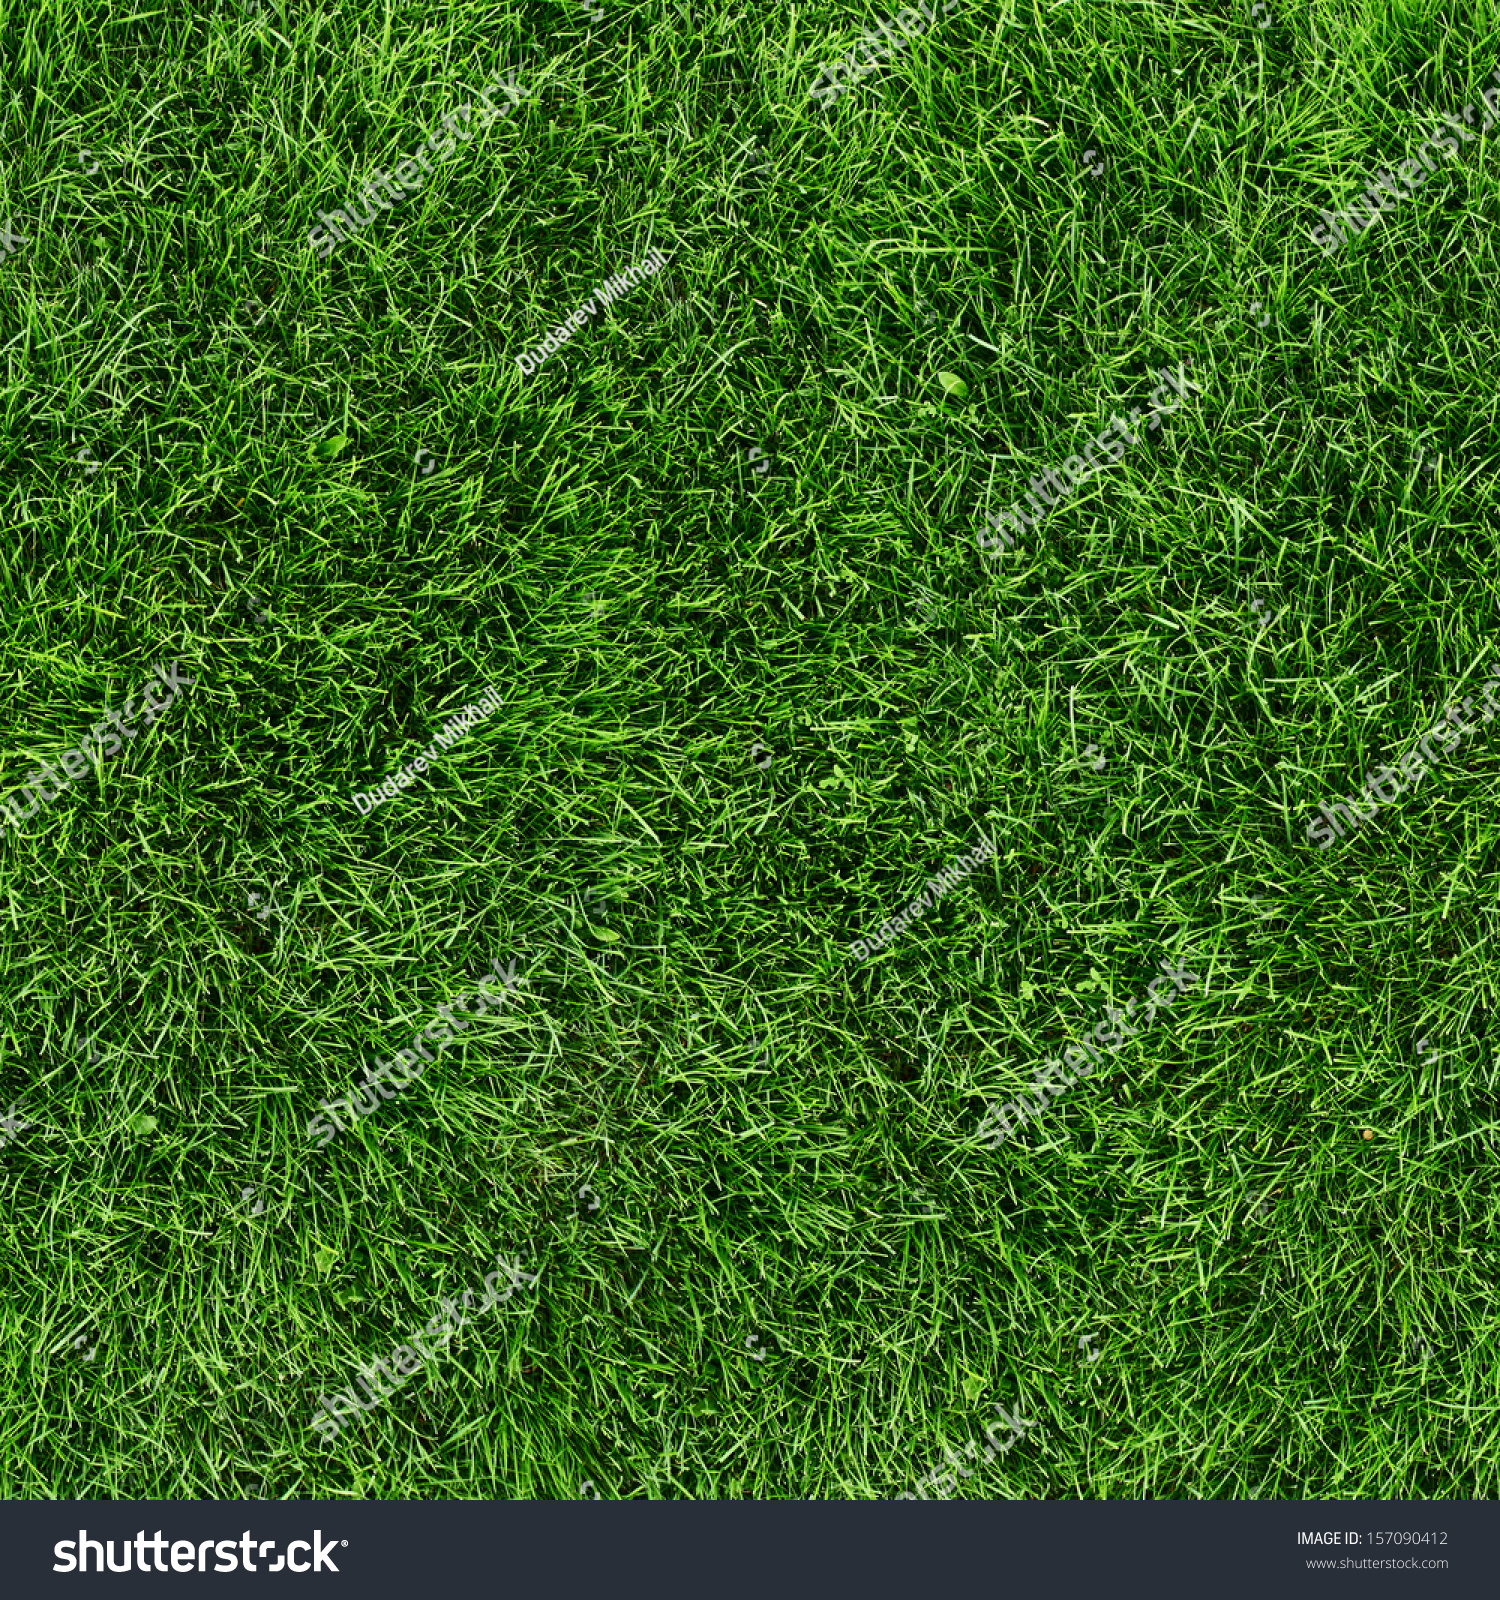 Green grass seamless texture. Seamless in only horizontal dimension. #157090412